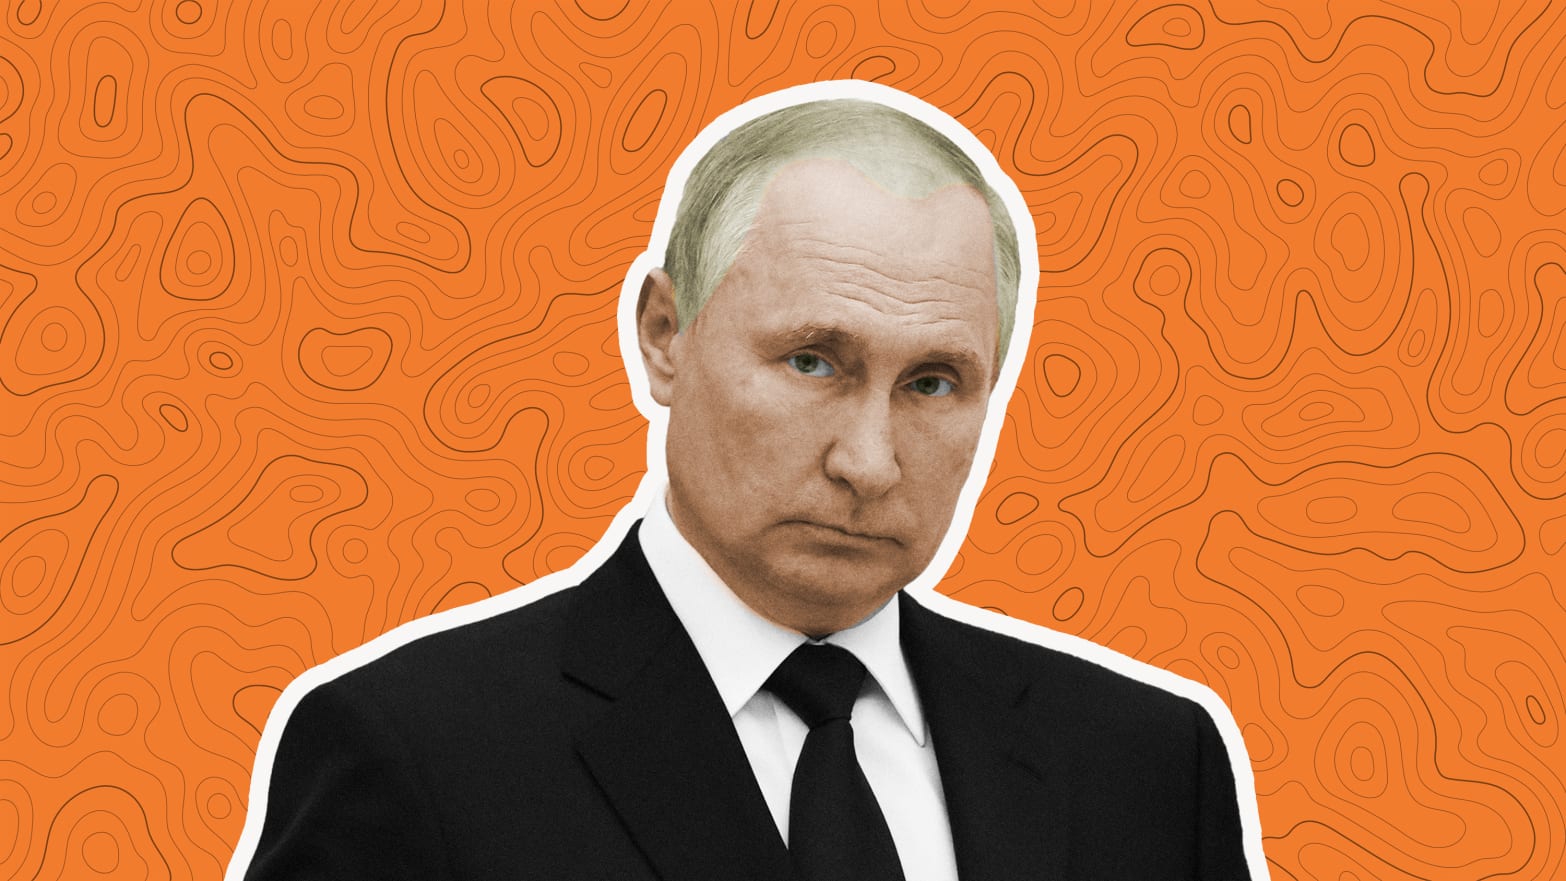 Putin's sanctions war created a Russian cheese industry overnight